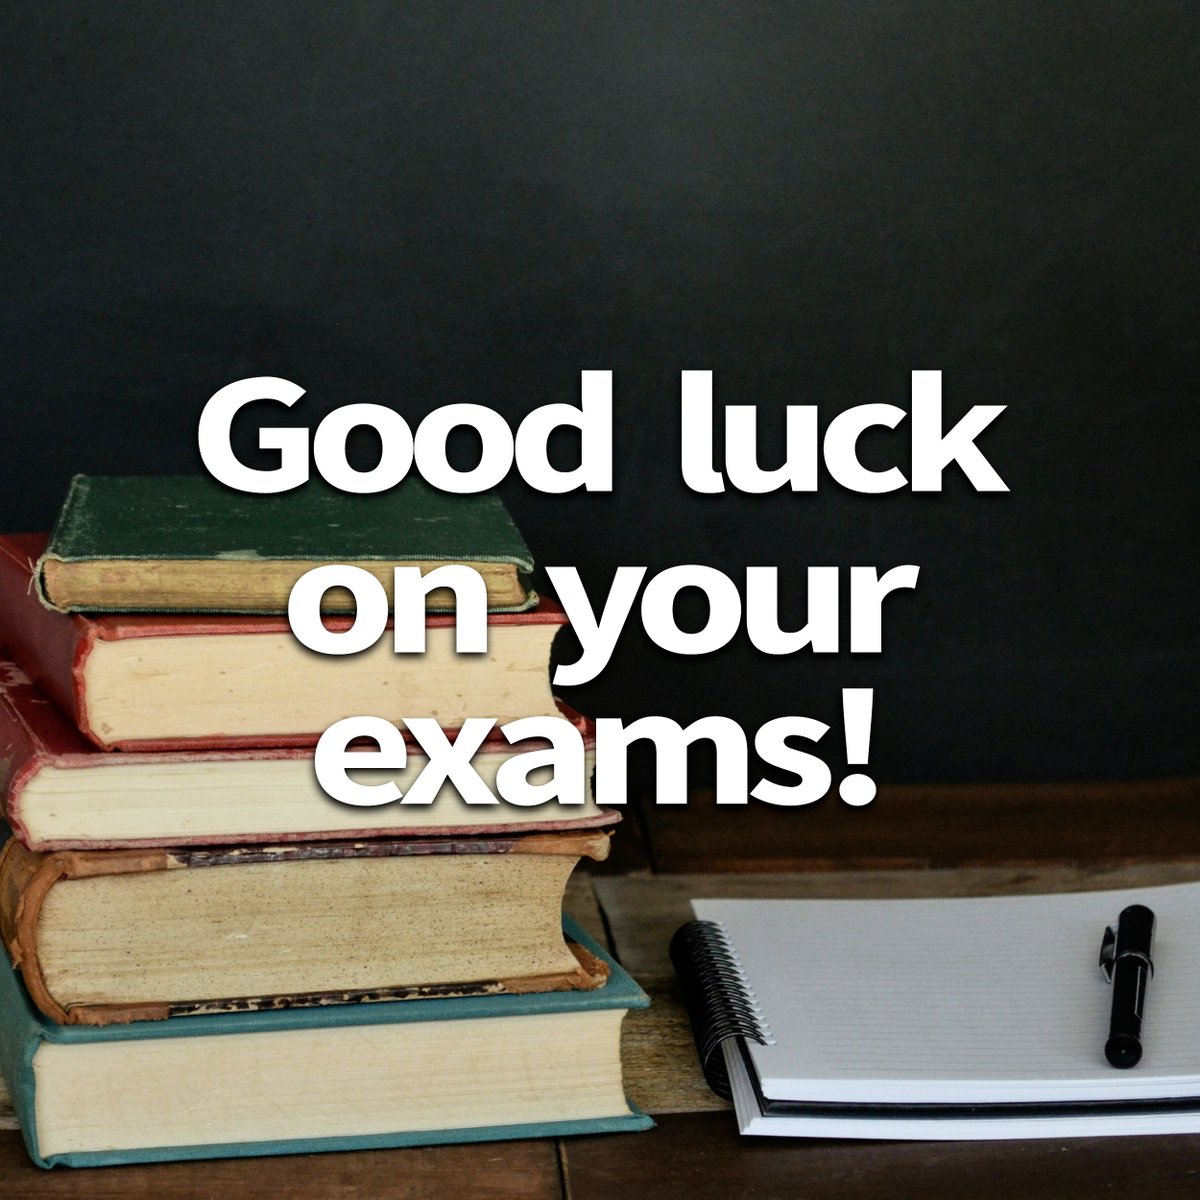 Wishing all students the best of luck on your exams! Sending you all the good vibes and positive energy. You've got this! 📚💪 #YouCanDoIt #GoodLuck #CrushThoseExams #KPUFacultyofArts #KPU #kpuarts #kwantlenu #kwantlenpolytechnicuniversity #university #education